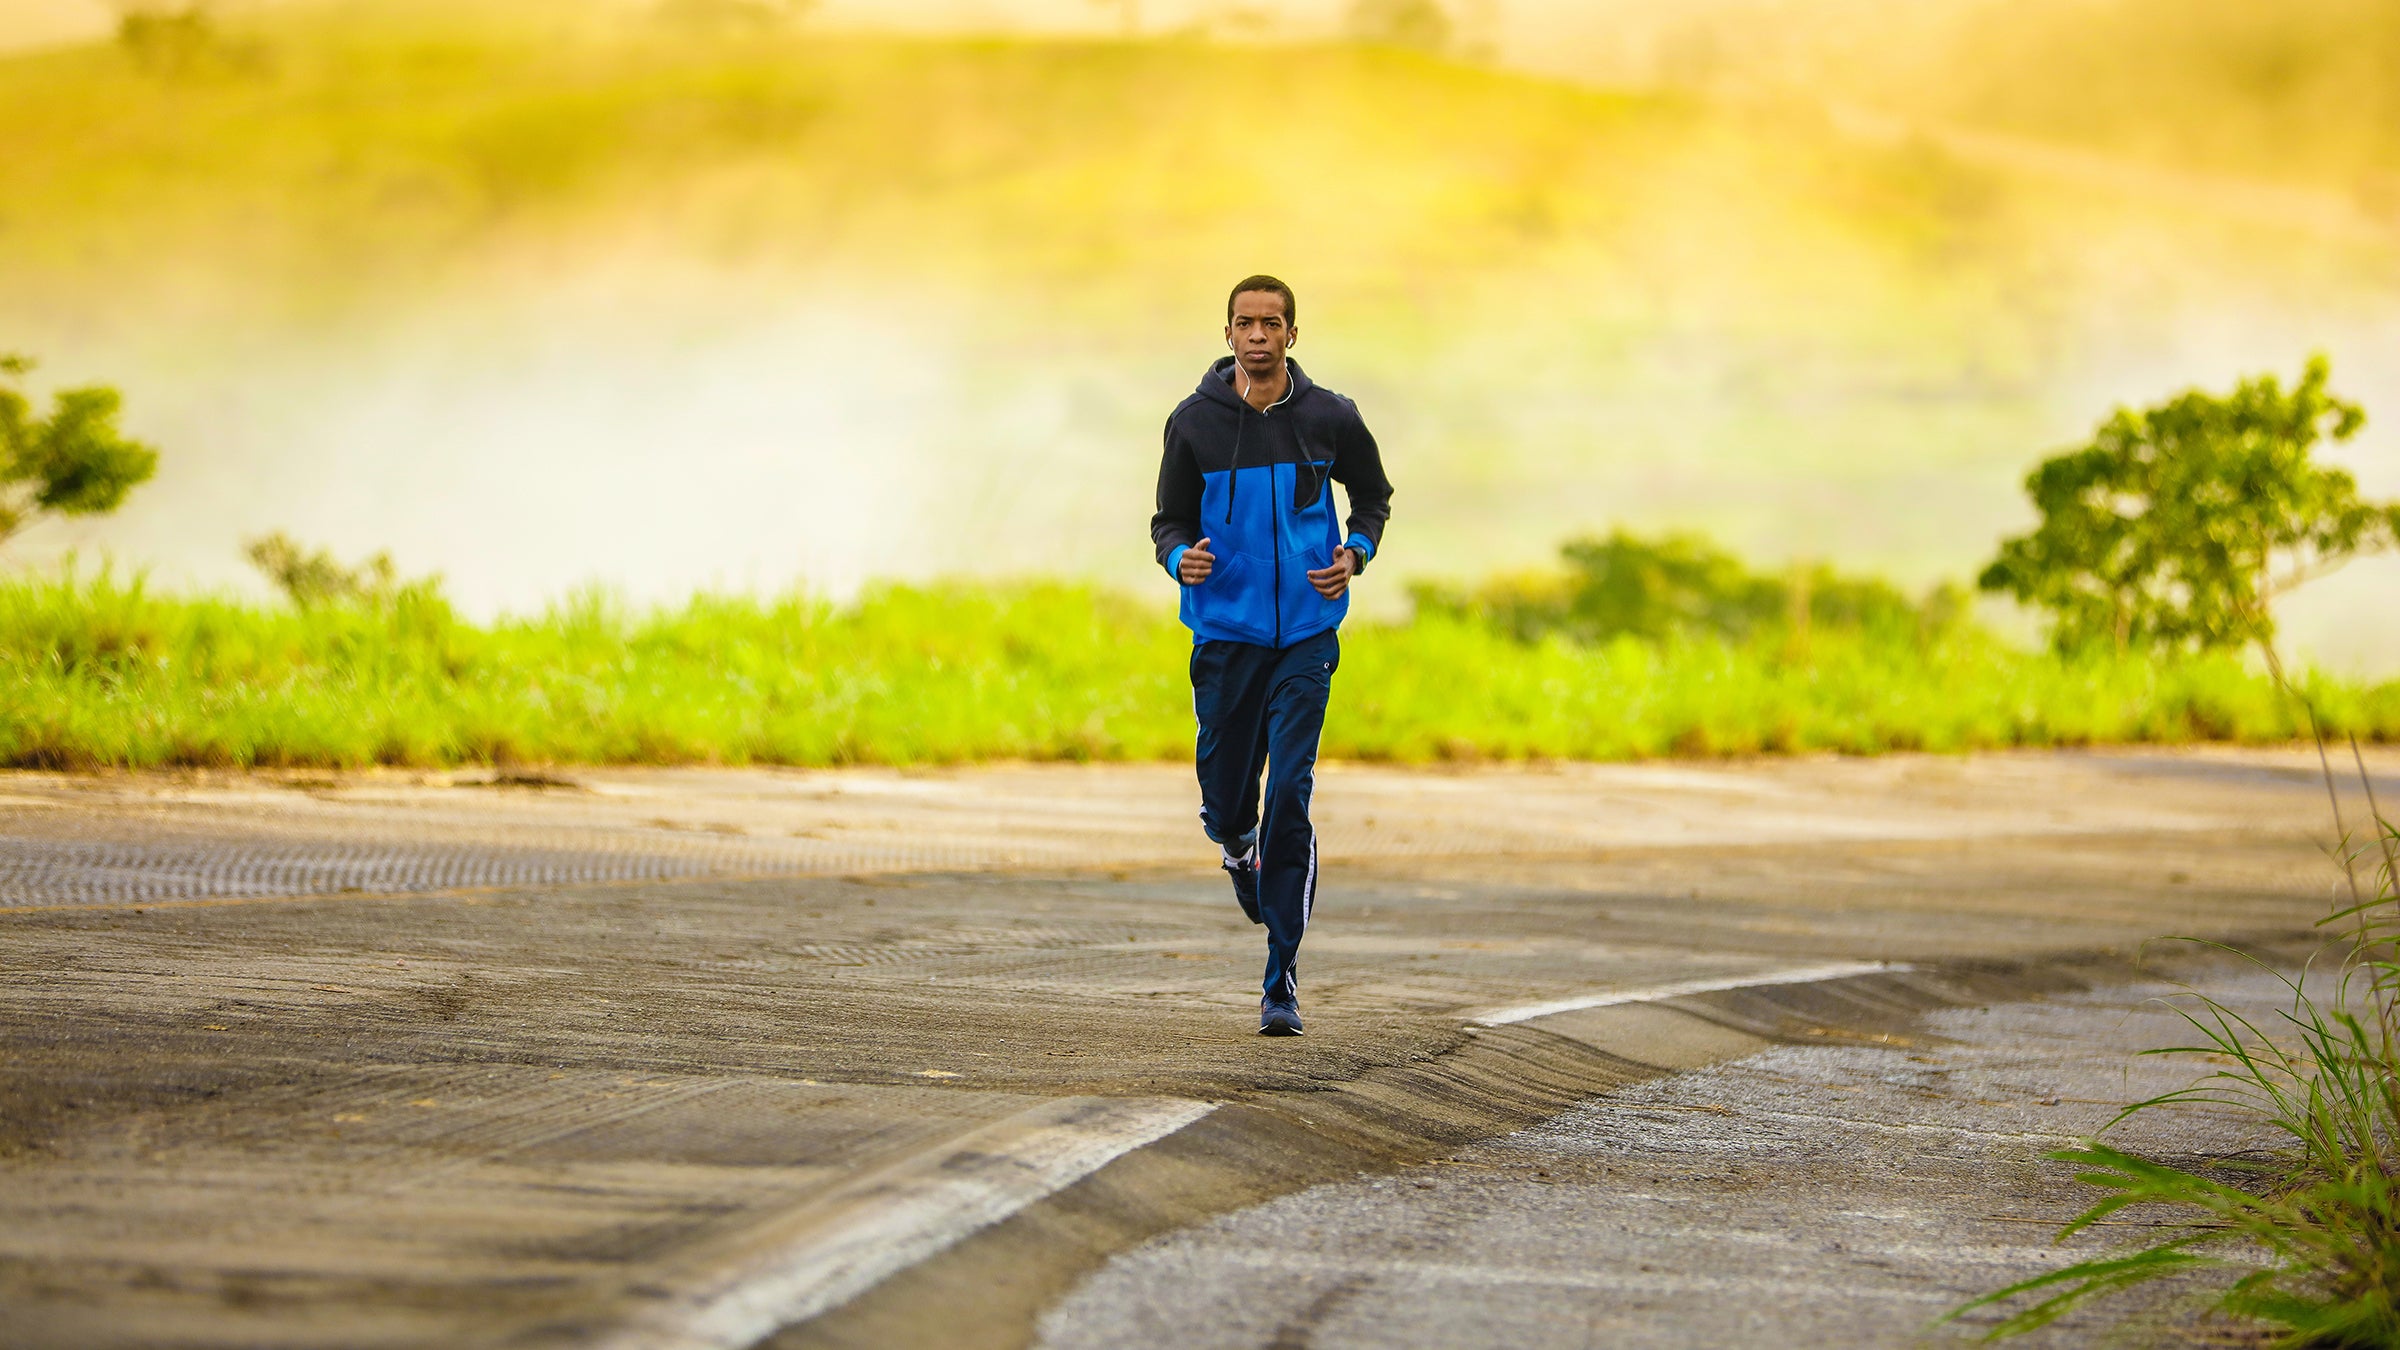 Jogging for beginners: key tips for all age groups, jogging